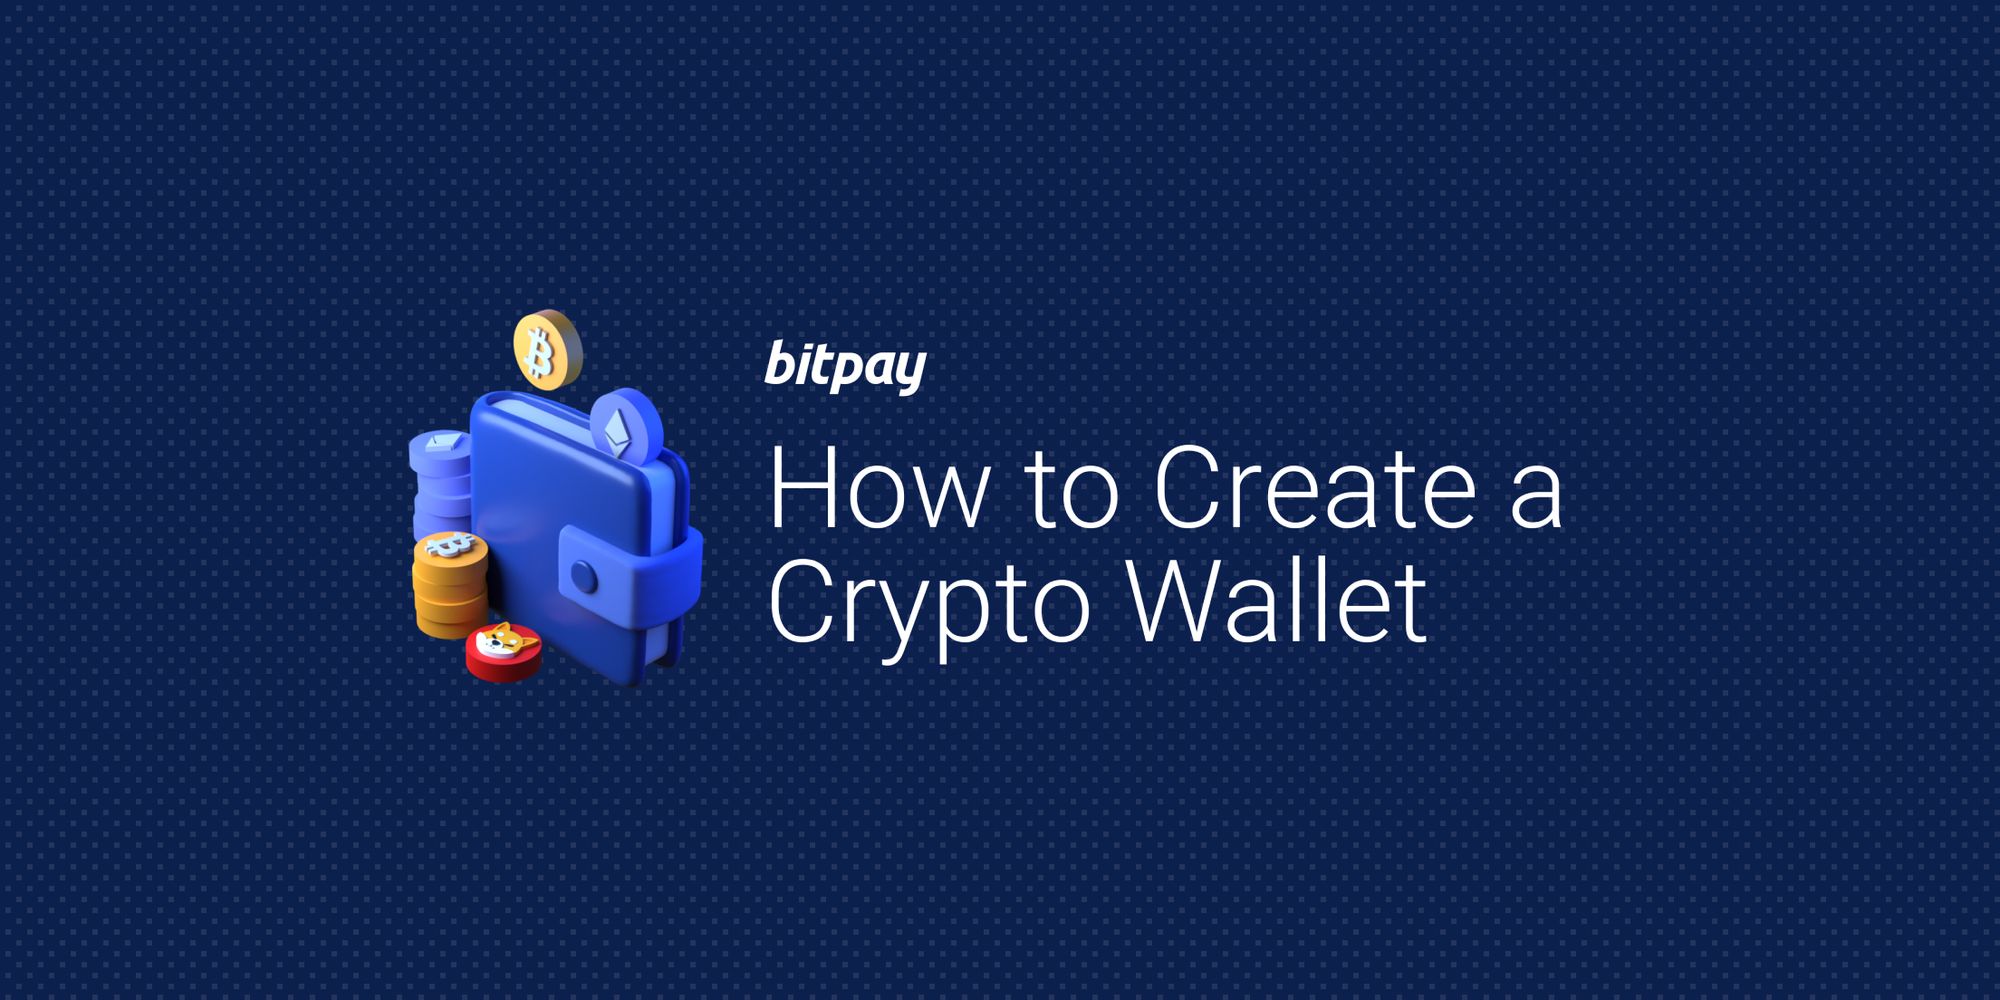 How to Choose and Set Up a Crypto Wallet | WIRED